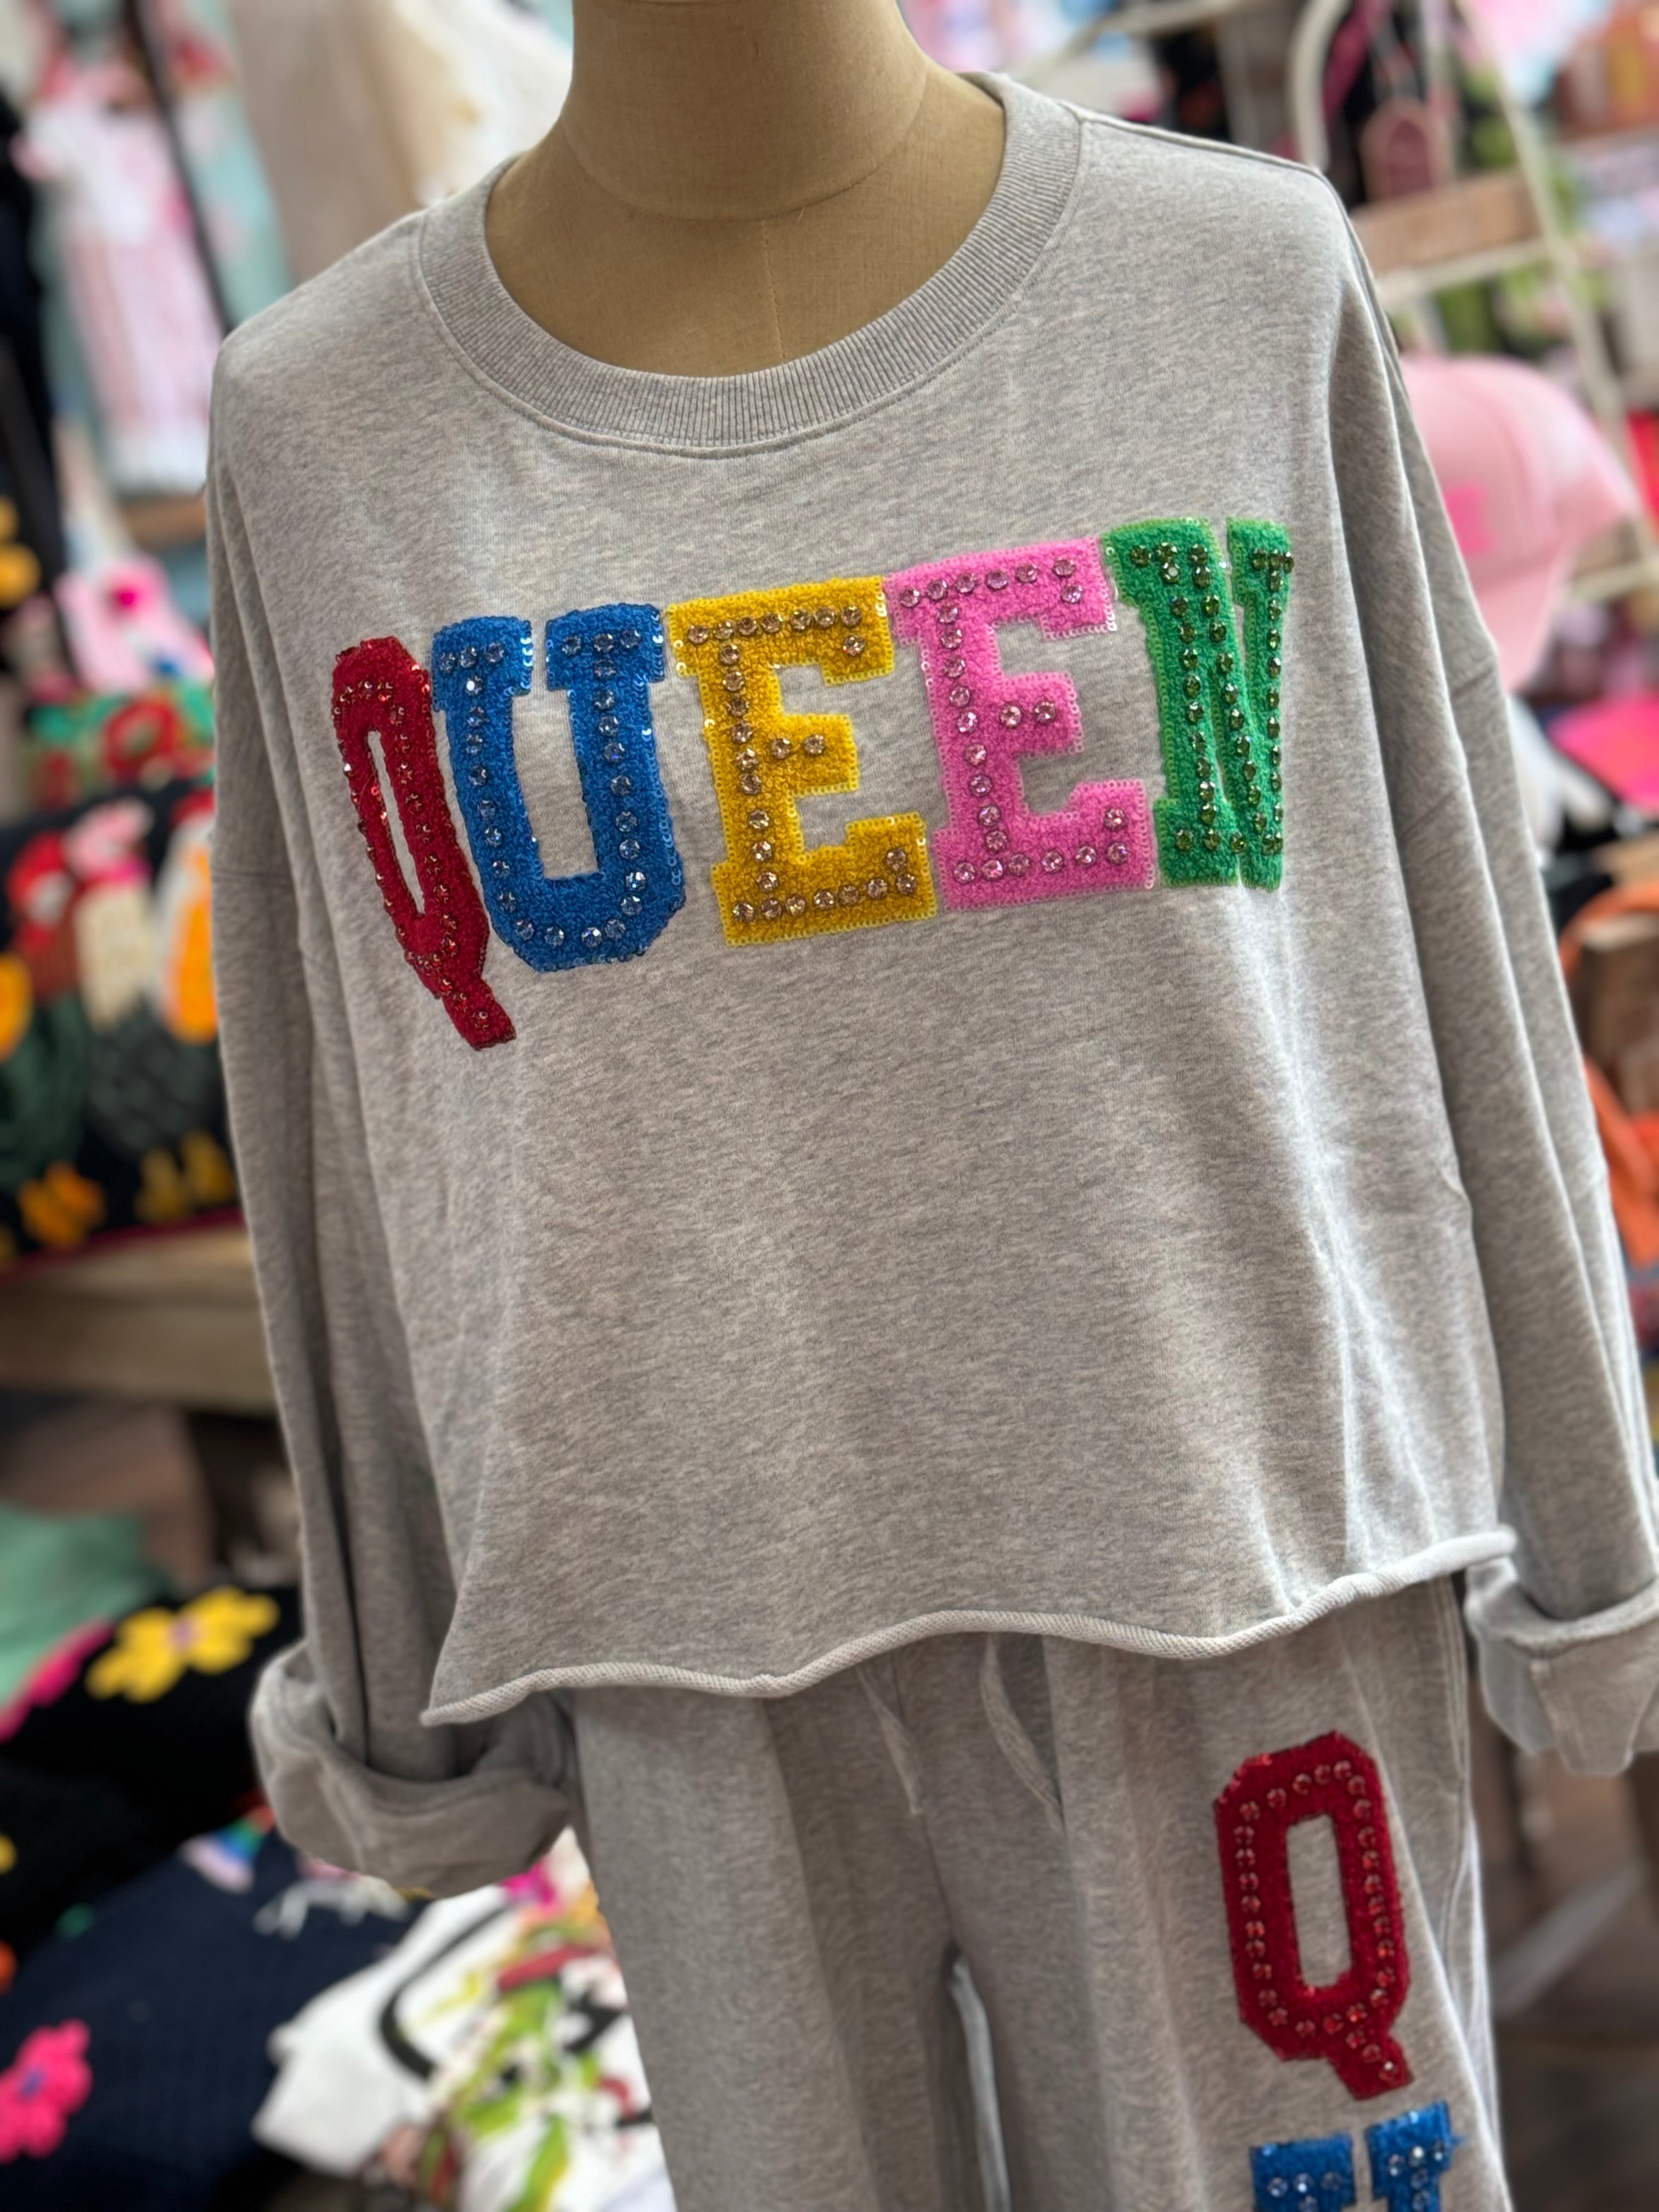 Queen Set (sold separately)